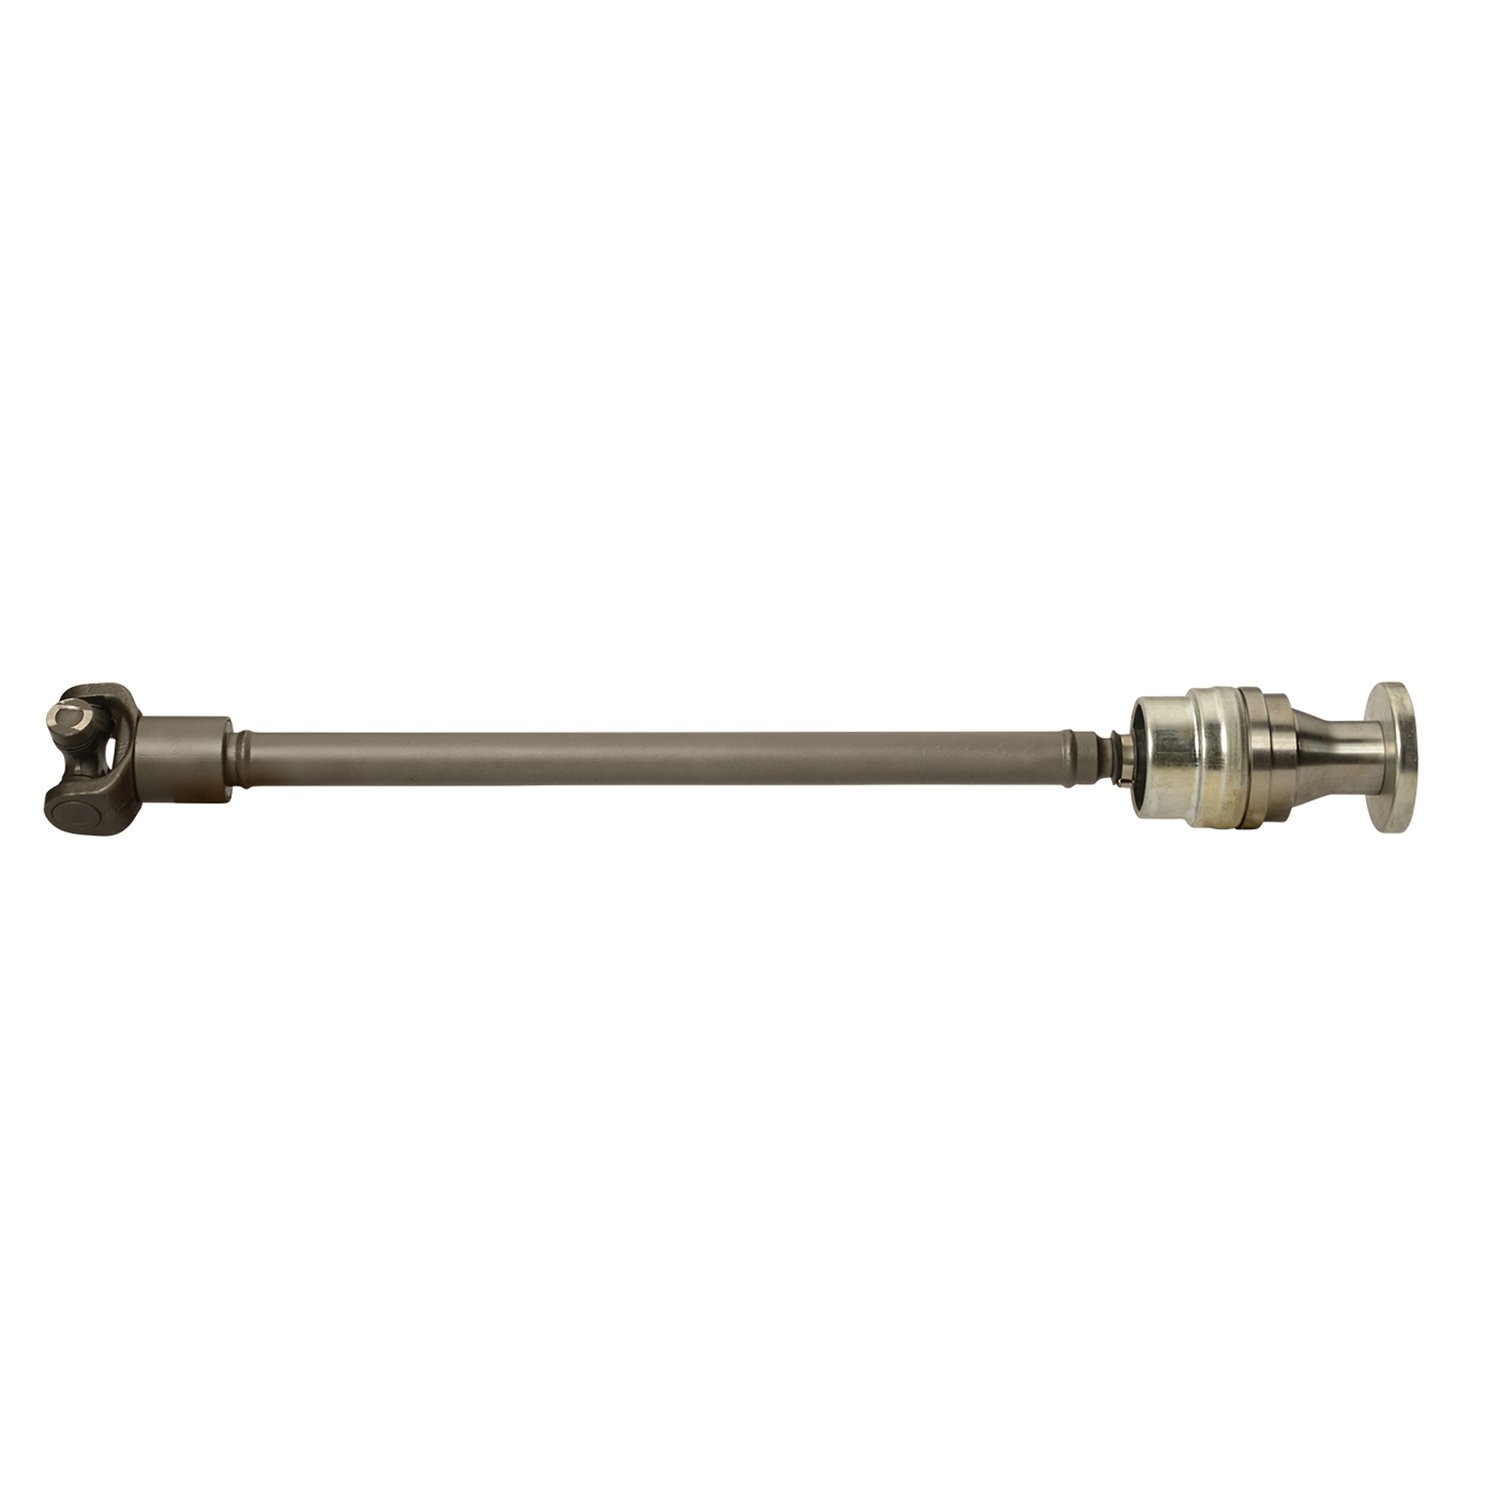 USA Standard ZDS9329 Front Driveshaft, For GM & Olds Midsize Truck/Suv, 19 in. Weld-To-Weld